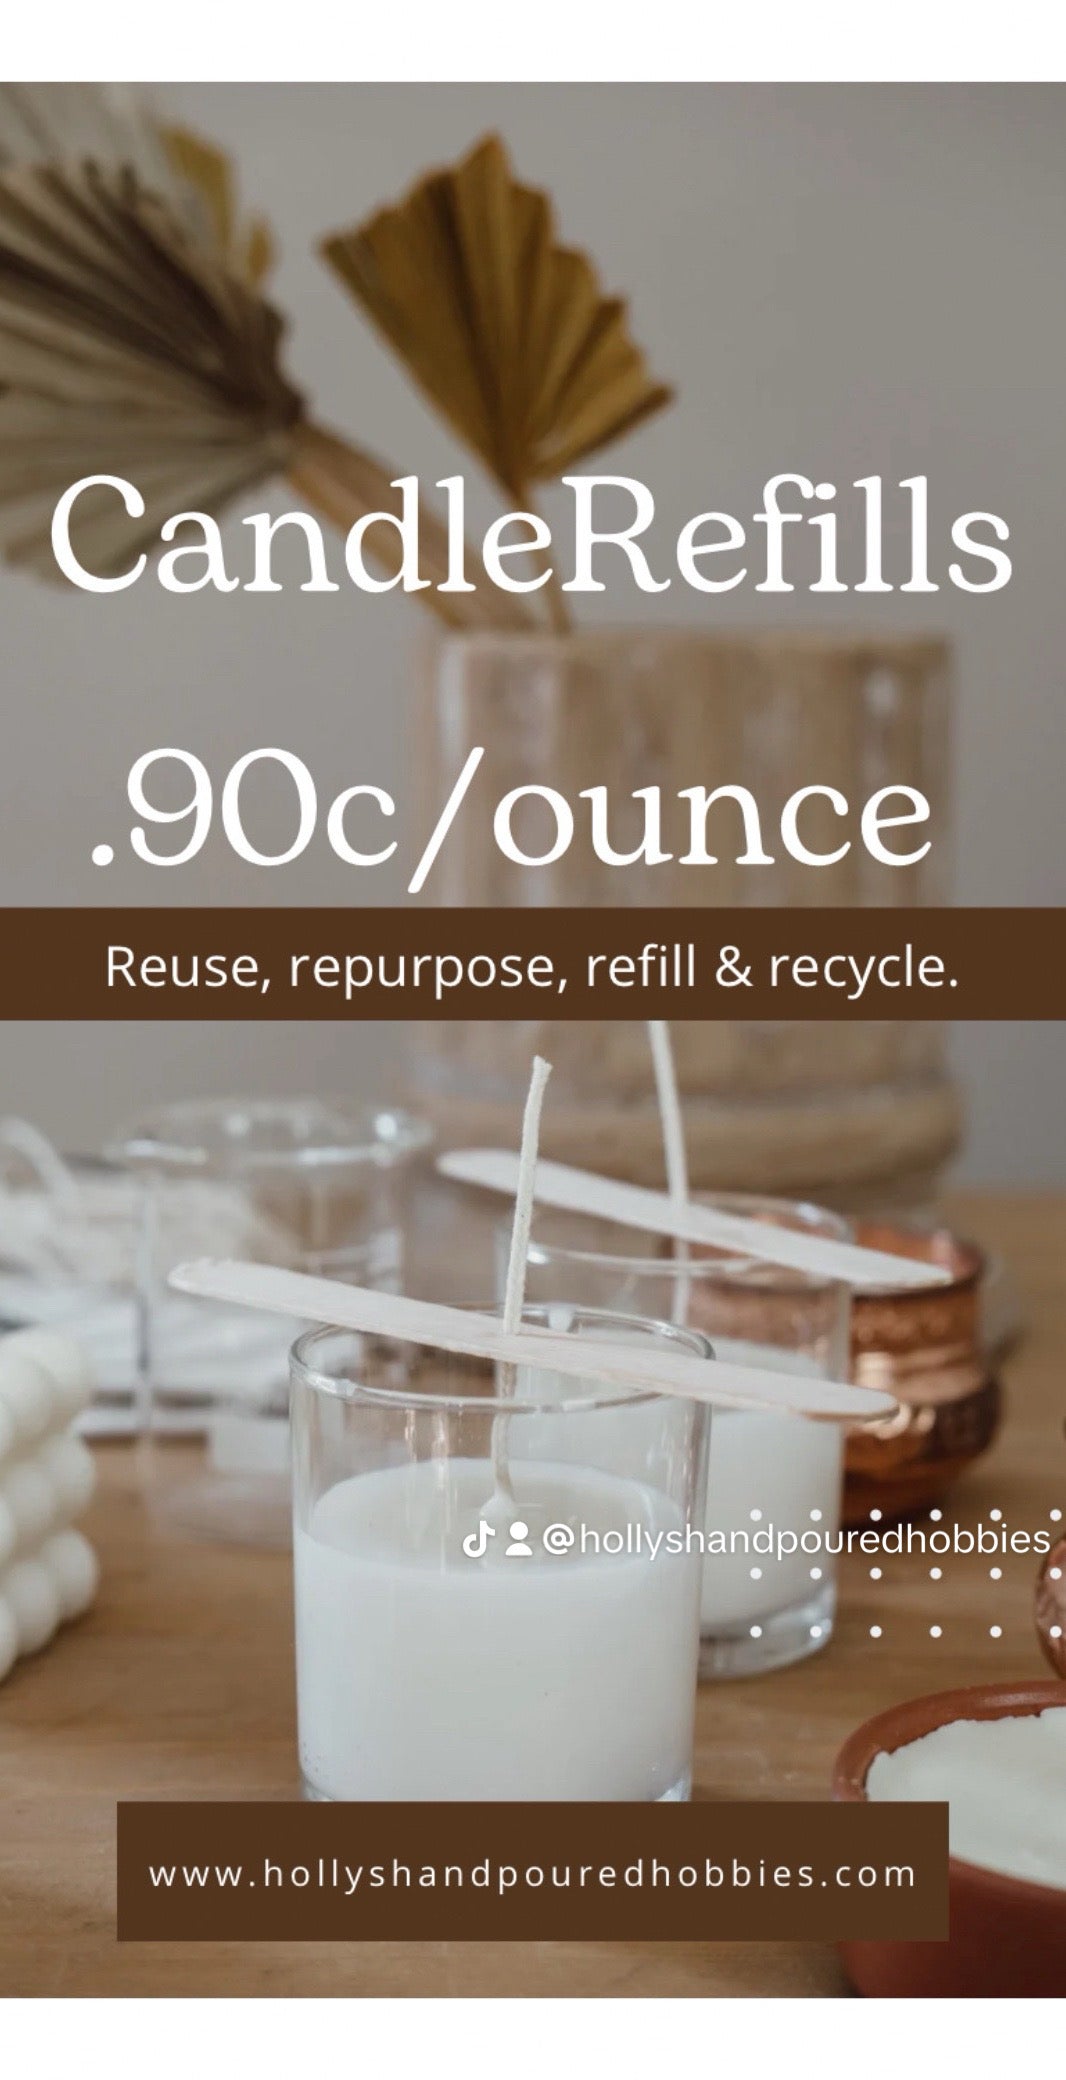 Candle Refills